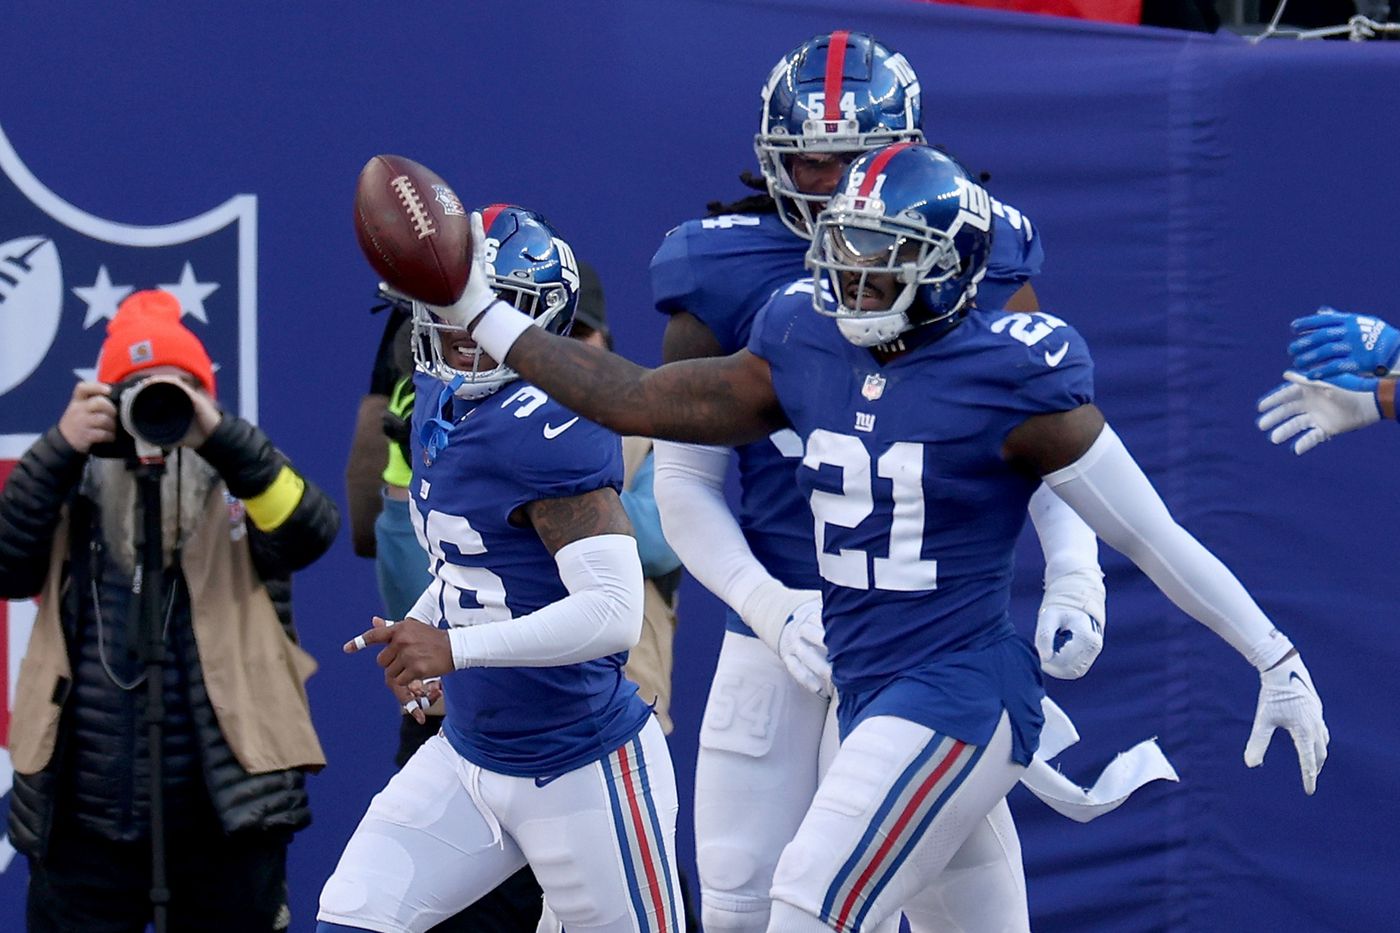 Landon Collins and the Giants celebrate after defeating the Colts at home.